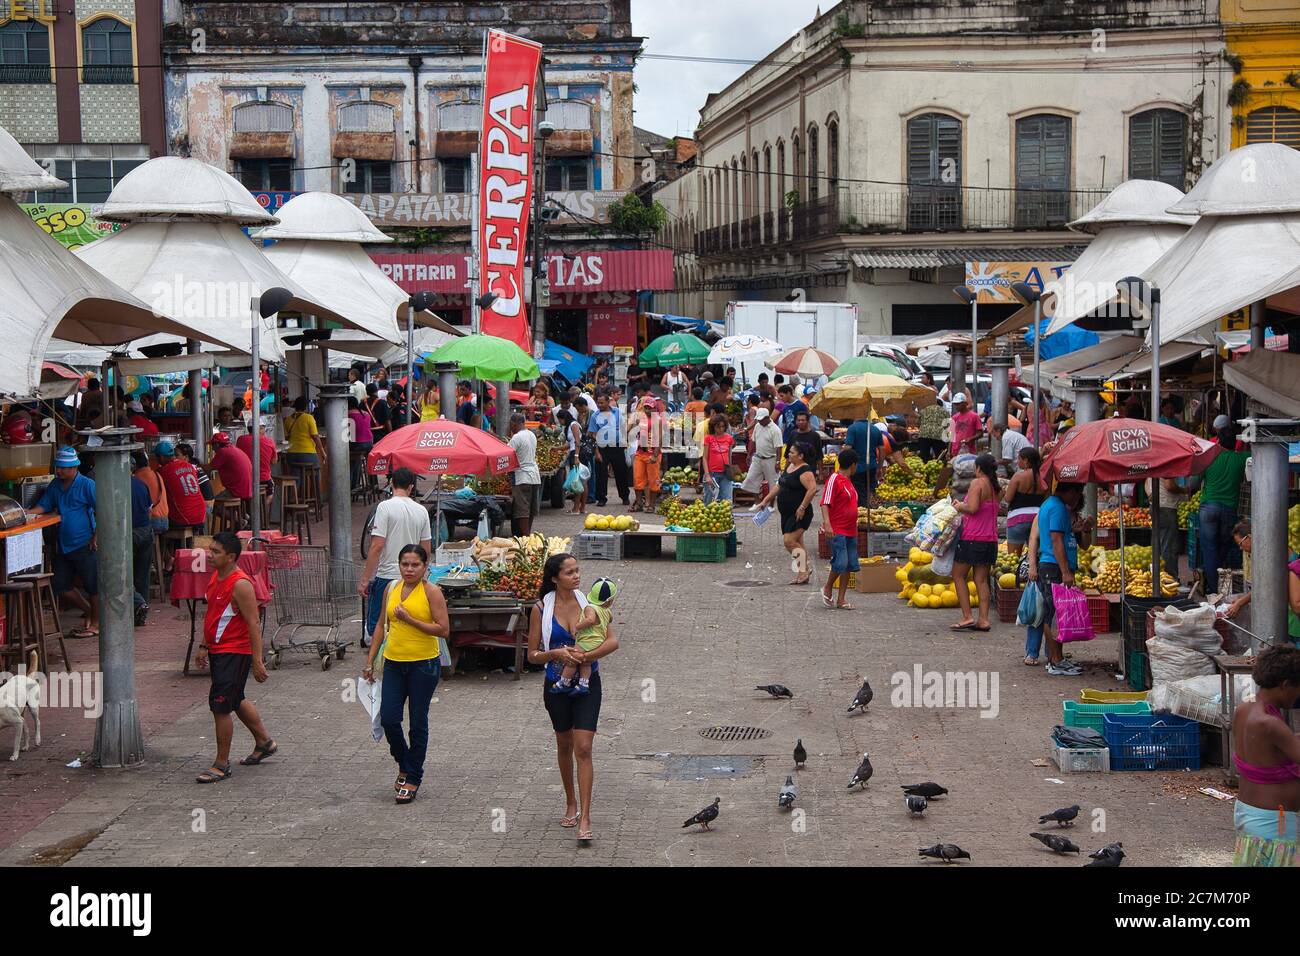 A general scene of people and activity in the market at Belem in Para State, Brazil. Stock Photo